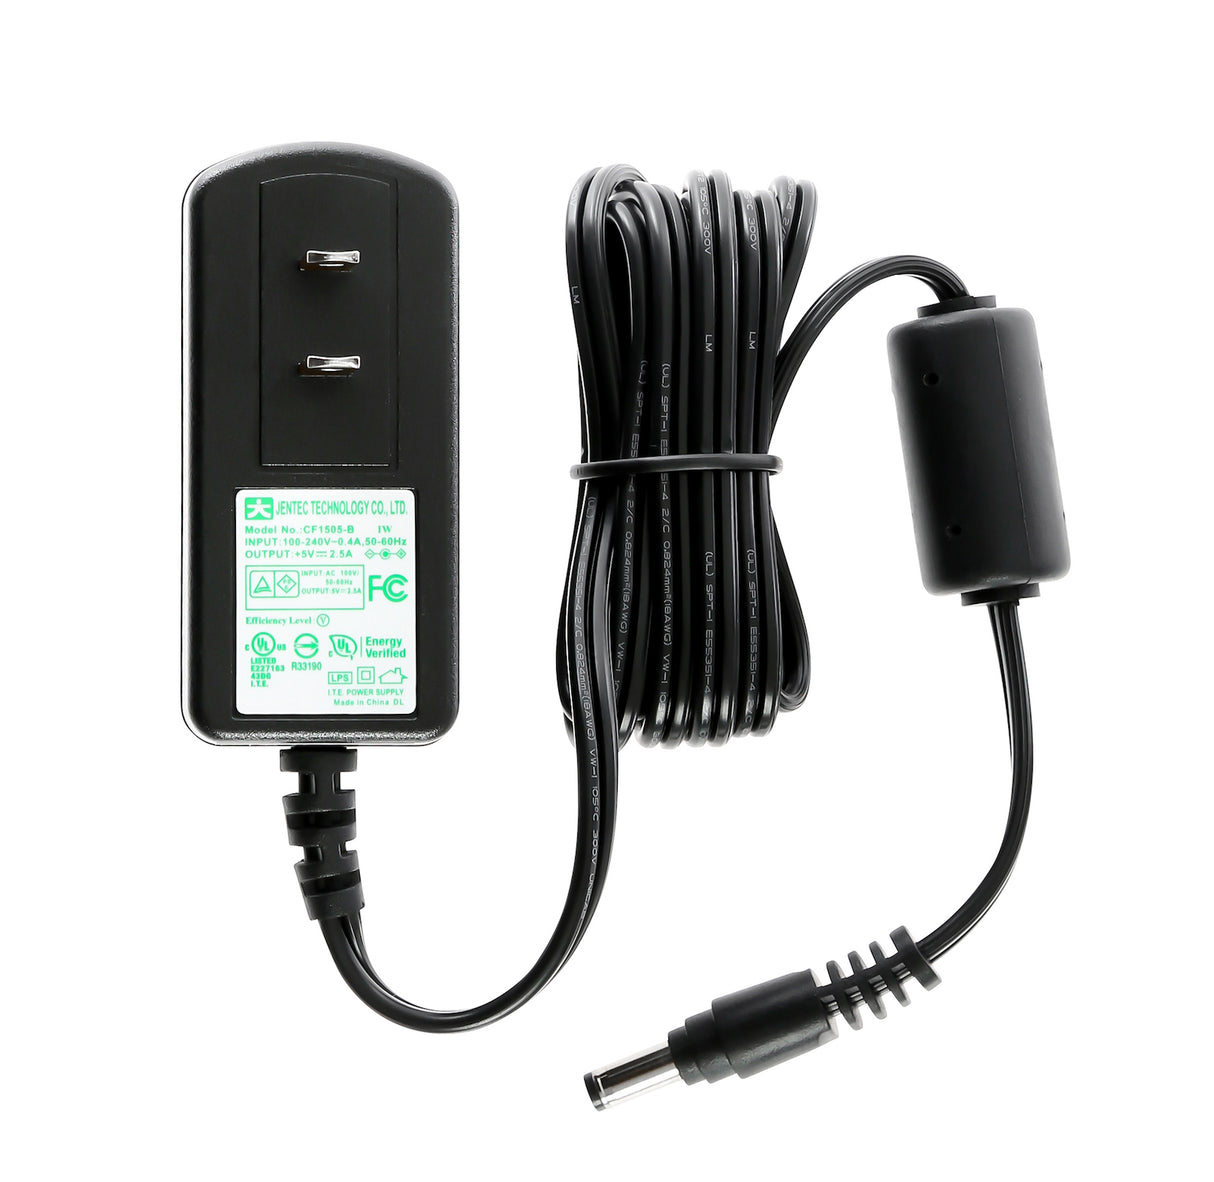 weBoost 470103 Connect 4G Signal Booster Kit - Power Supply